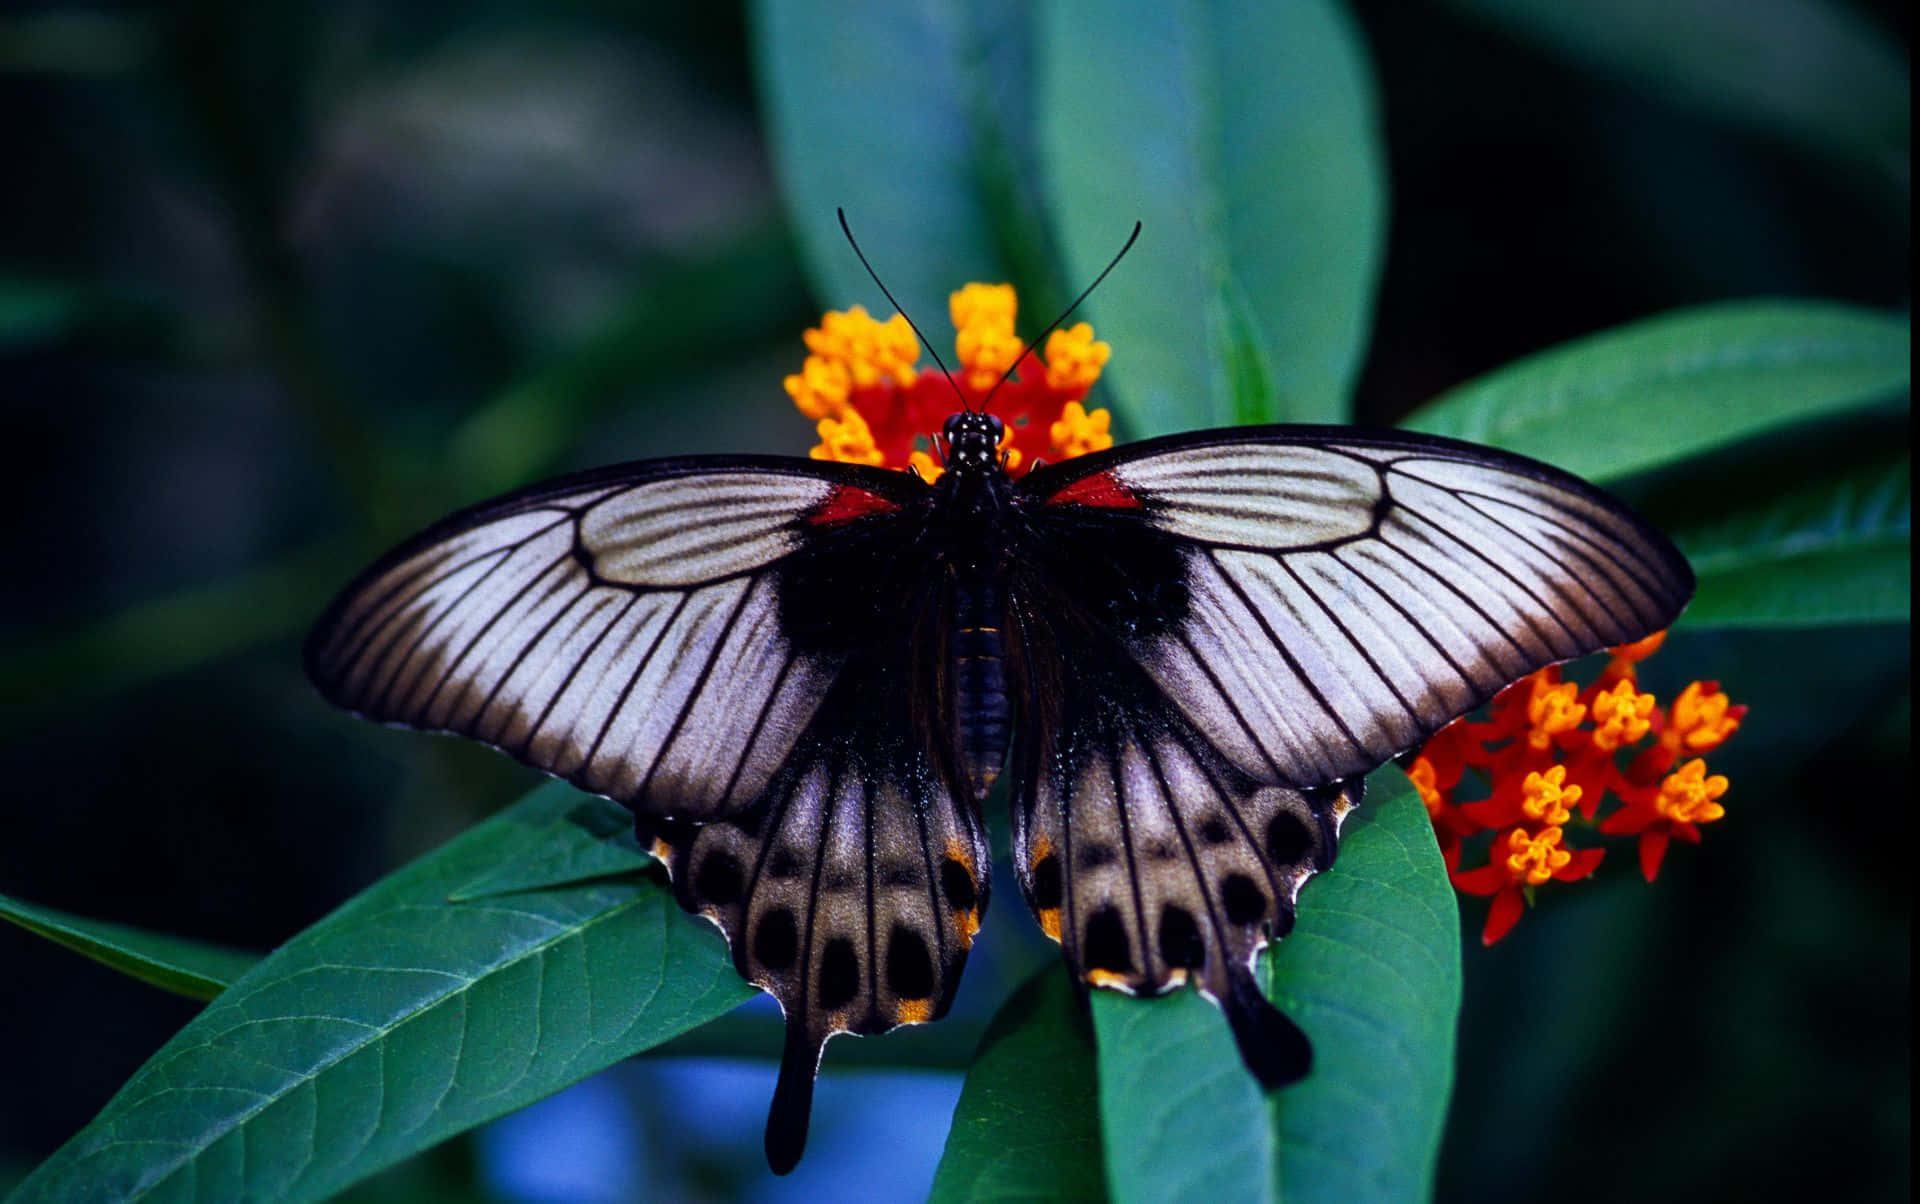 "The Incredible Variety of Butterfly Species" Wallpaper